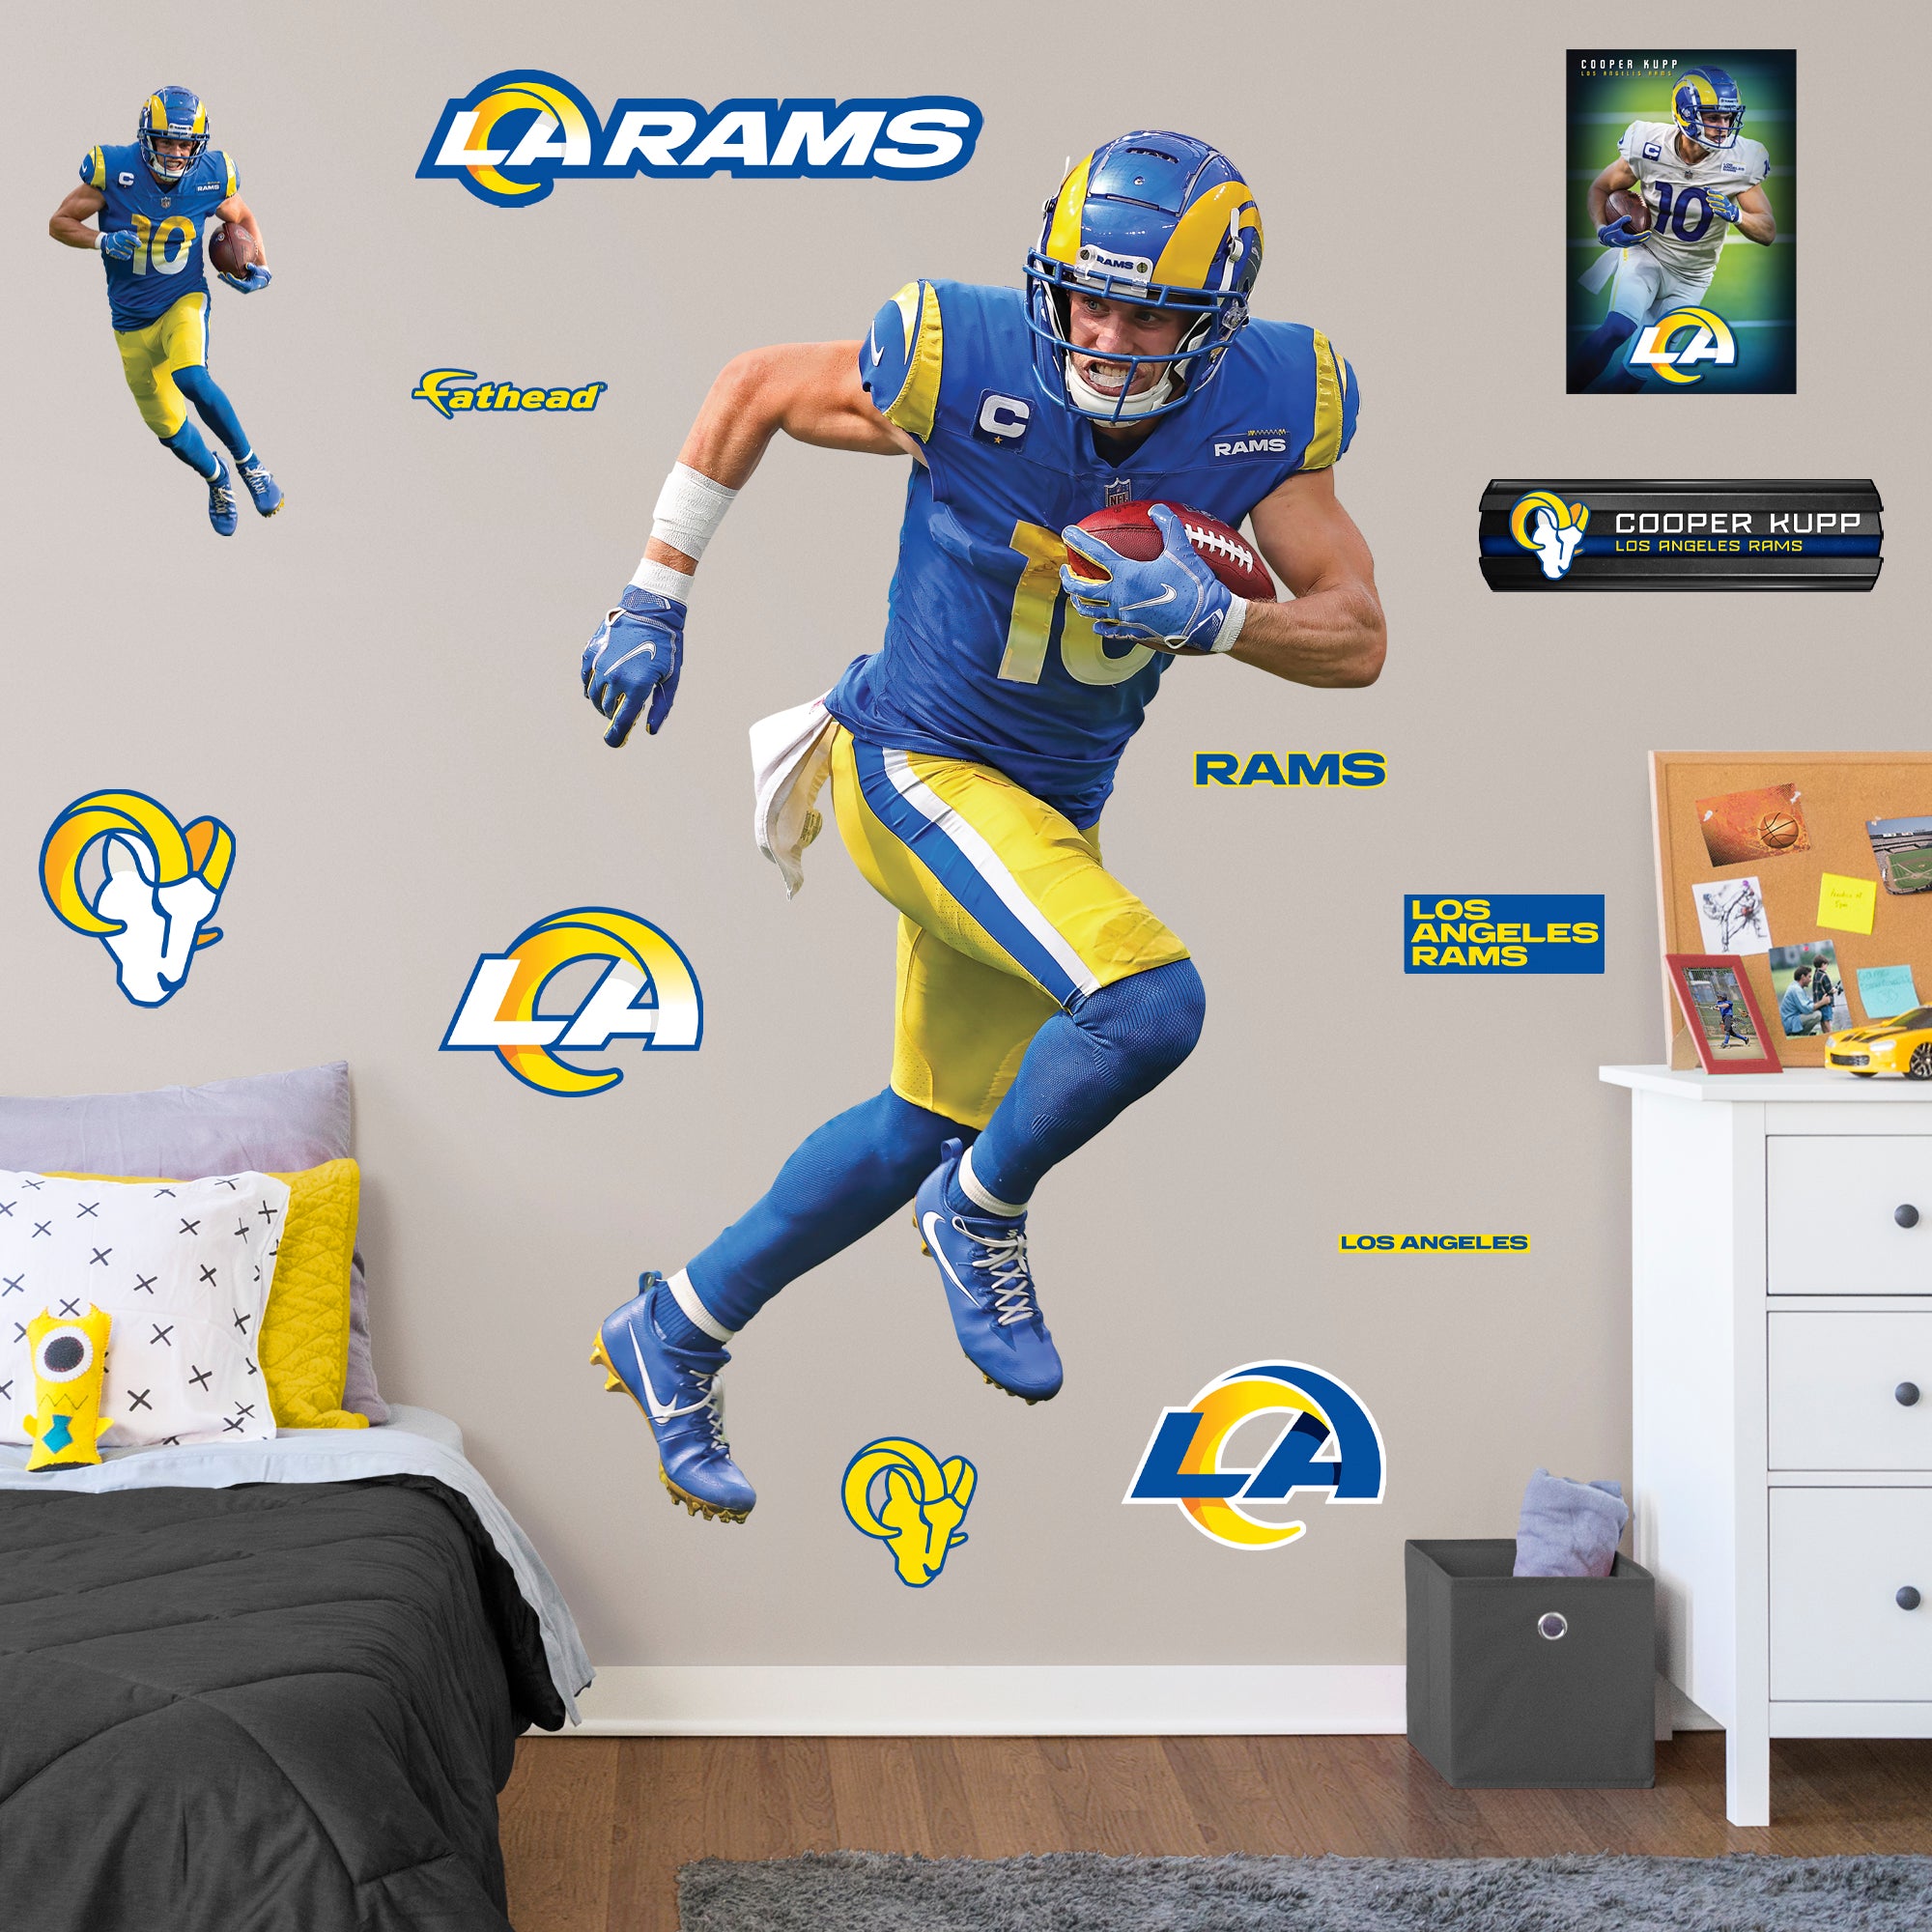 Cooper Kupp 2020 - Officially Licensed NFL Removable Wall Decal Life-Size Athlete + 12 Decals (44"W x 75.5"H) by Fathead | Vinyl